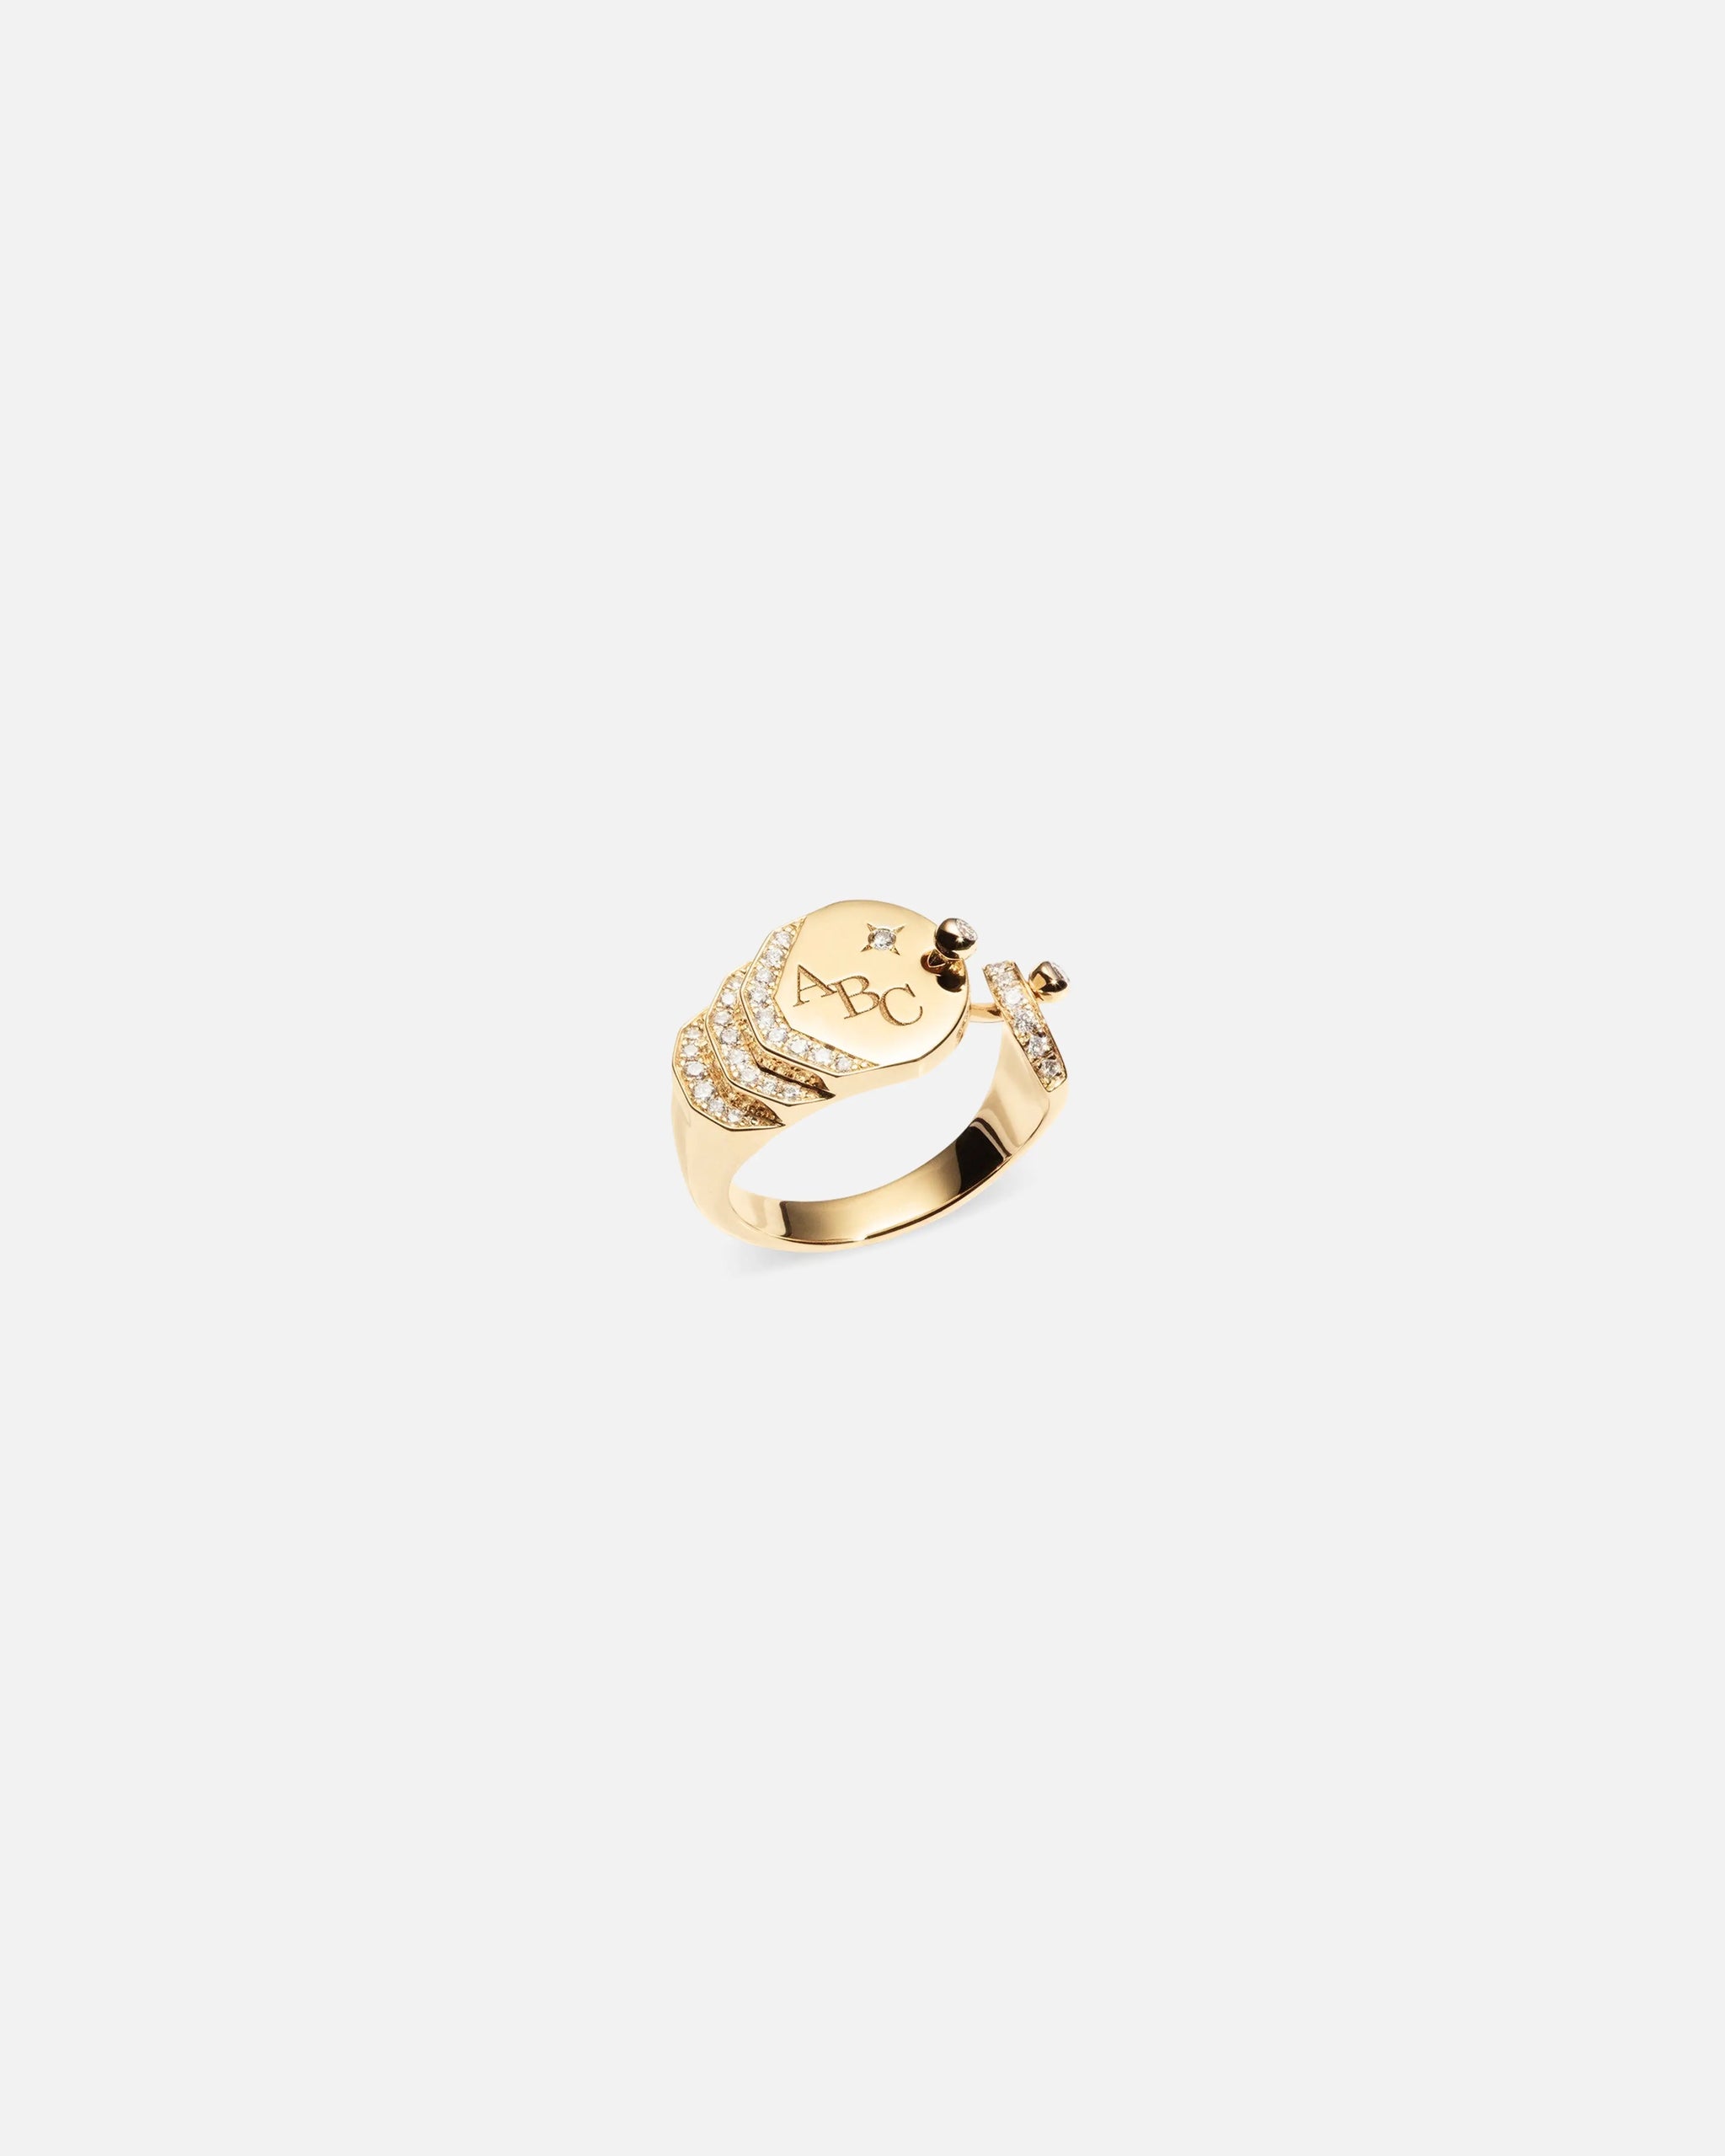 Diamond Mood Signet Ring in Yellow Gold - Nouvel Heritage - Nouvel Heritage